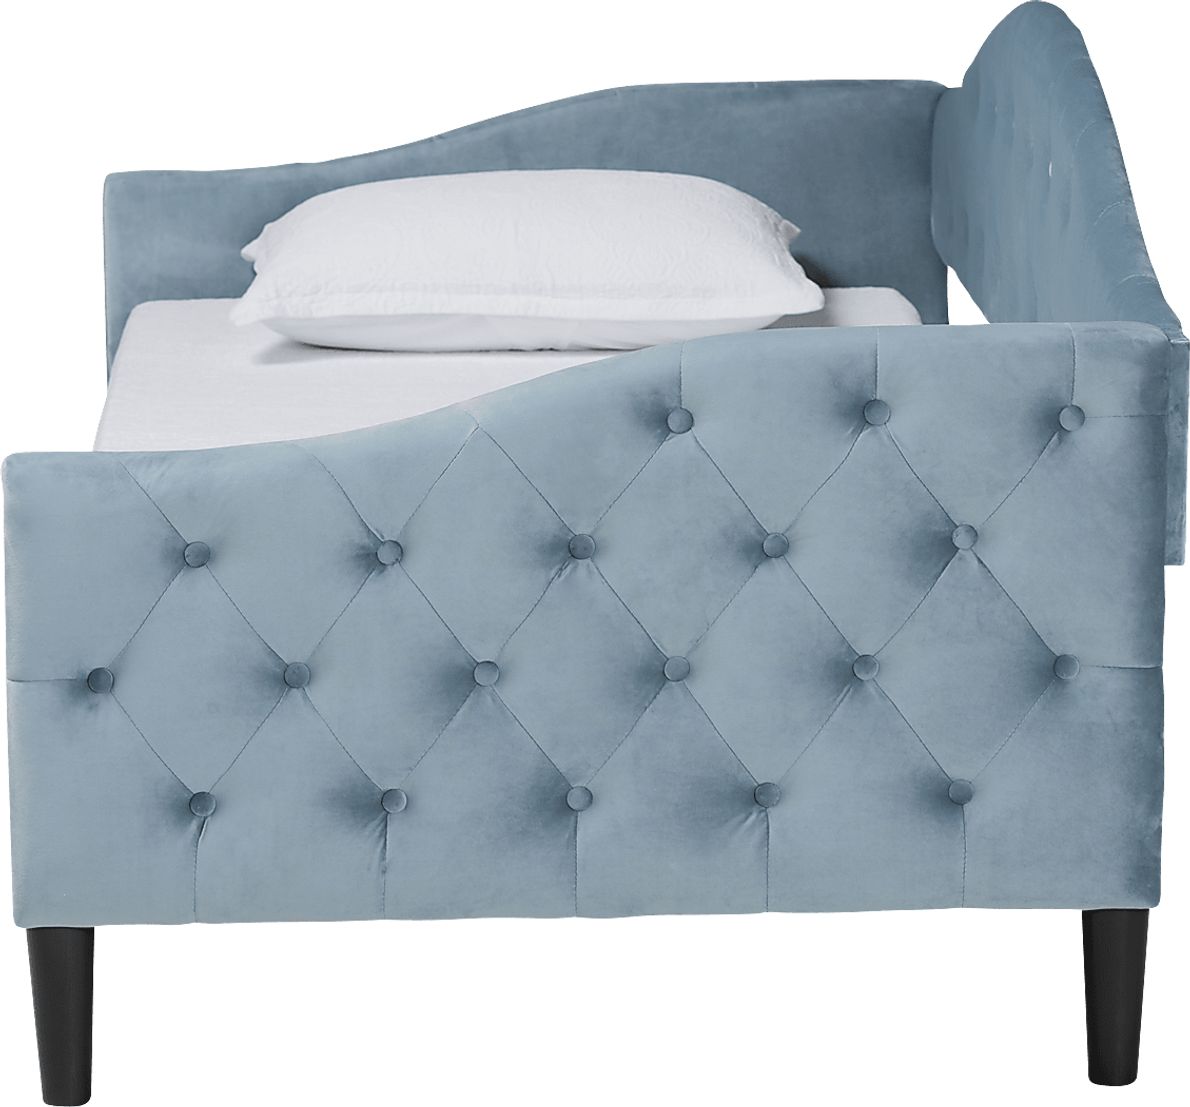 Noraleah Blue Twin Daybed